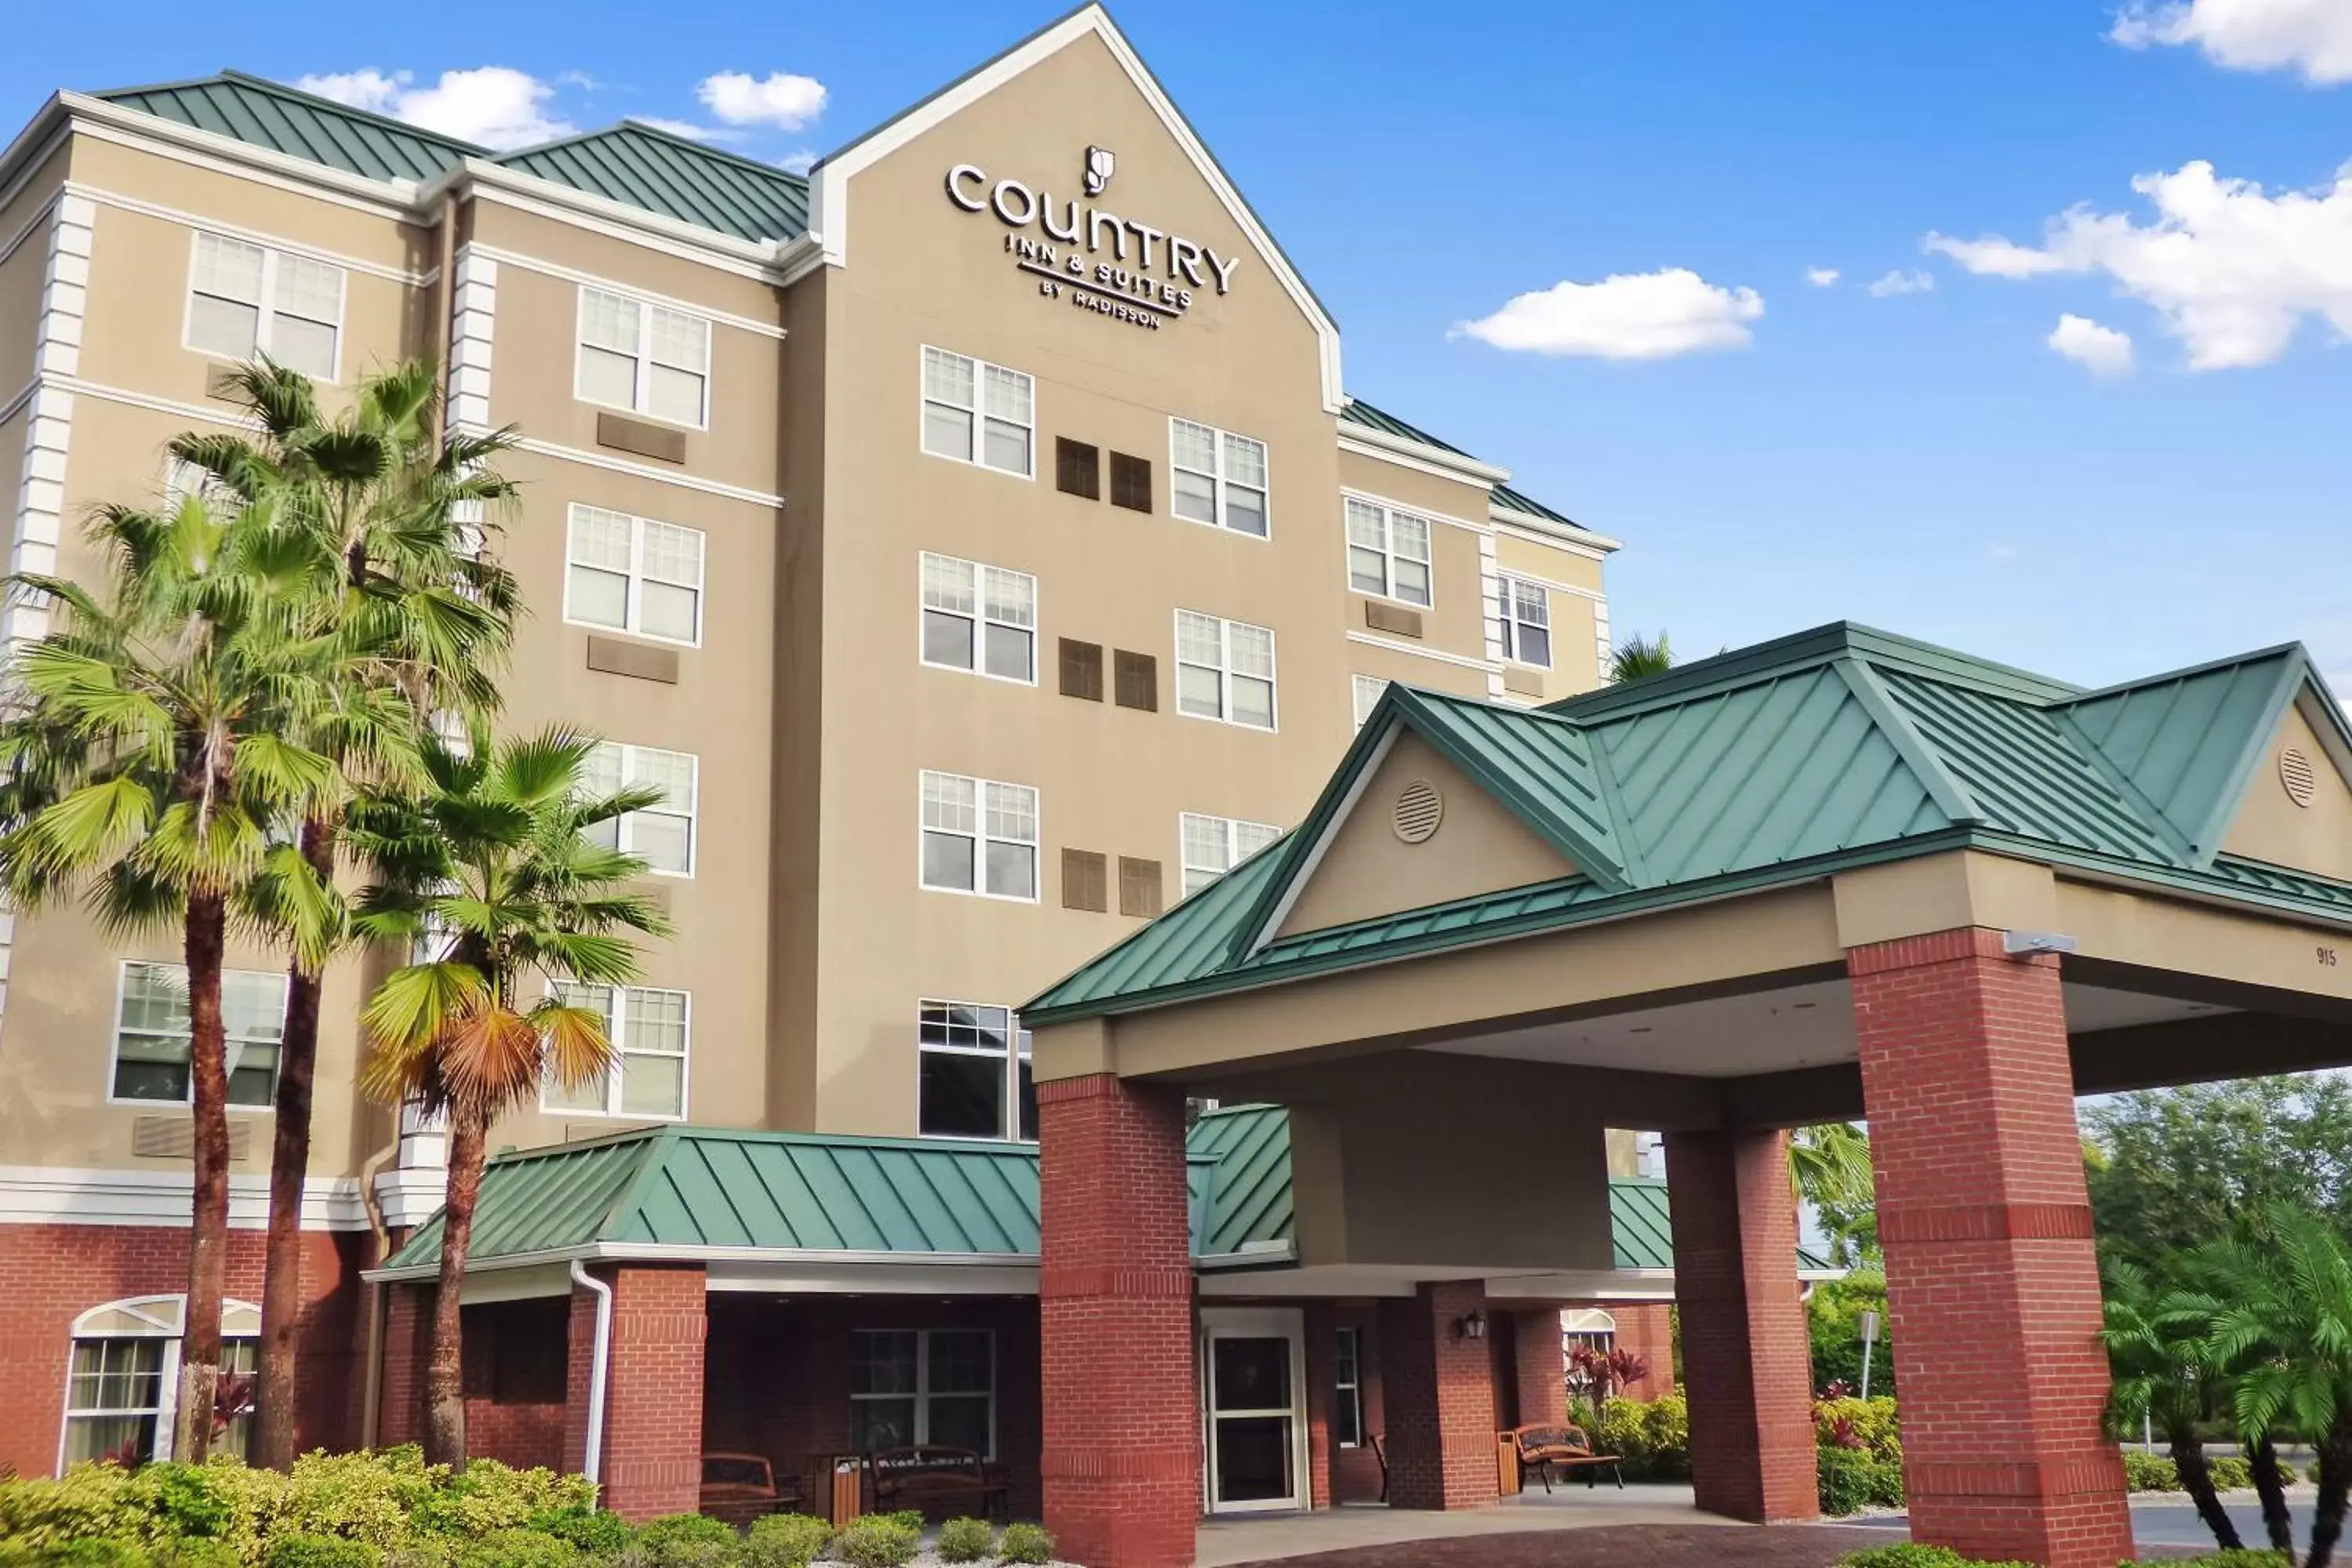 Property Building in Country Inn & Suites by Radisson, Tampa/Brandon, FL